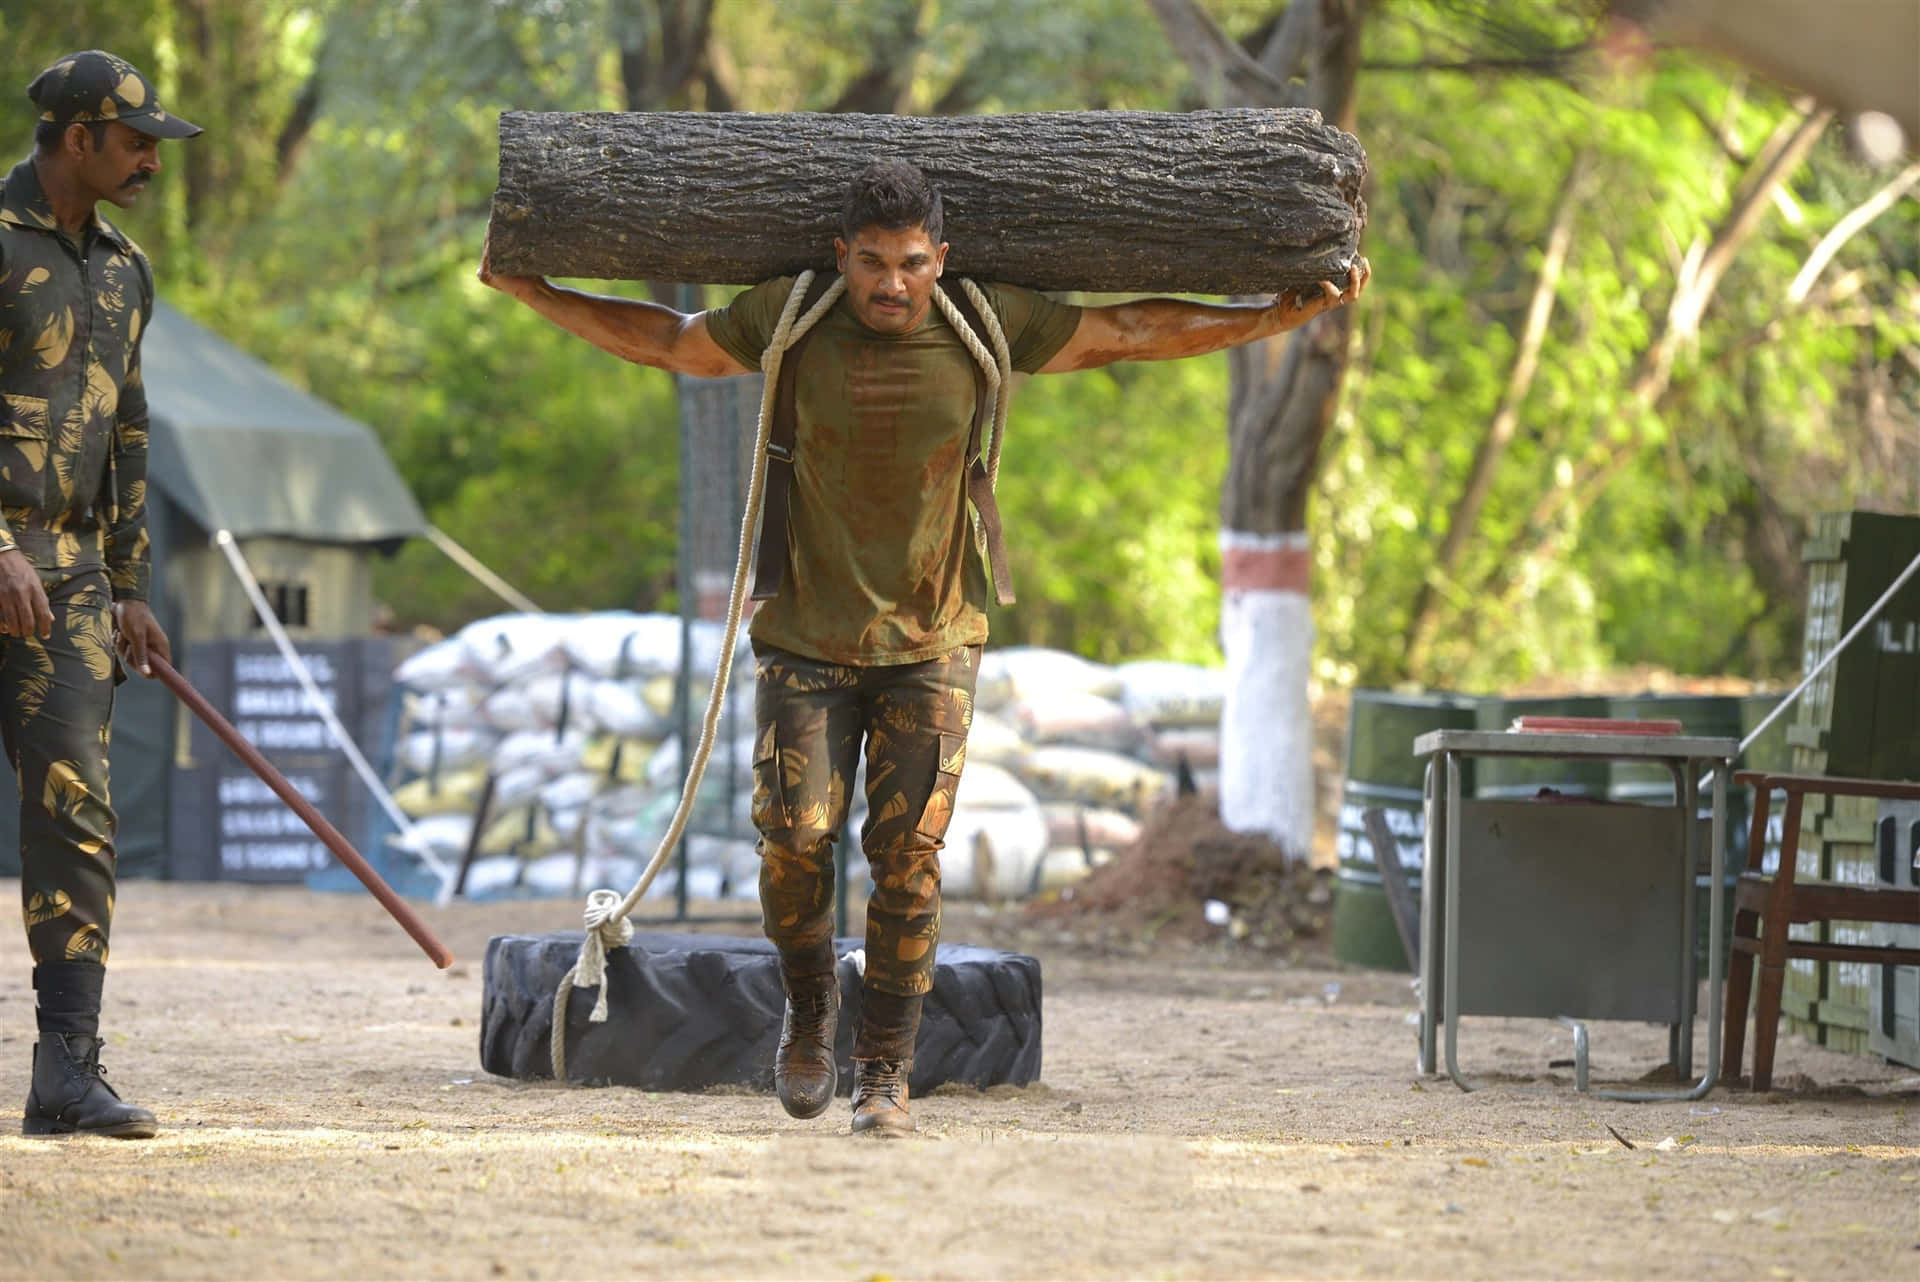 Surya, The Determined Soldier - A Still from the Movie 'Surya The Soldier' featuring Allu Arjun Wallpaper